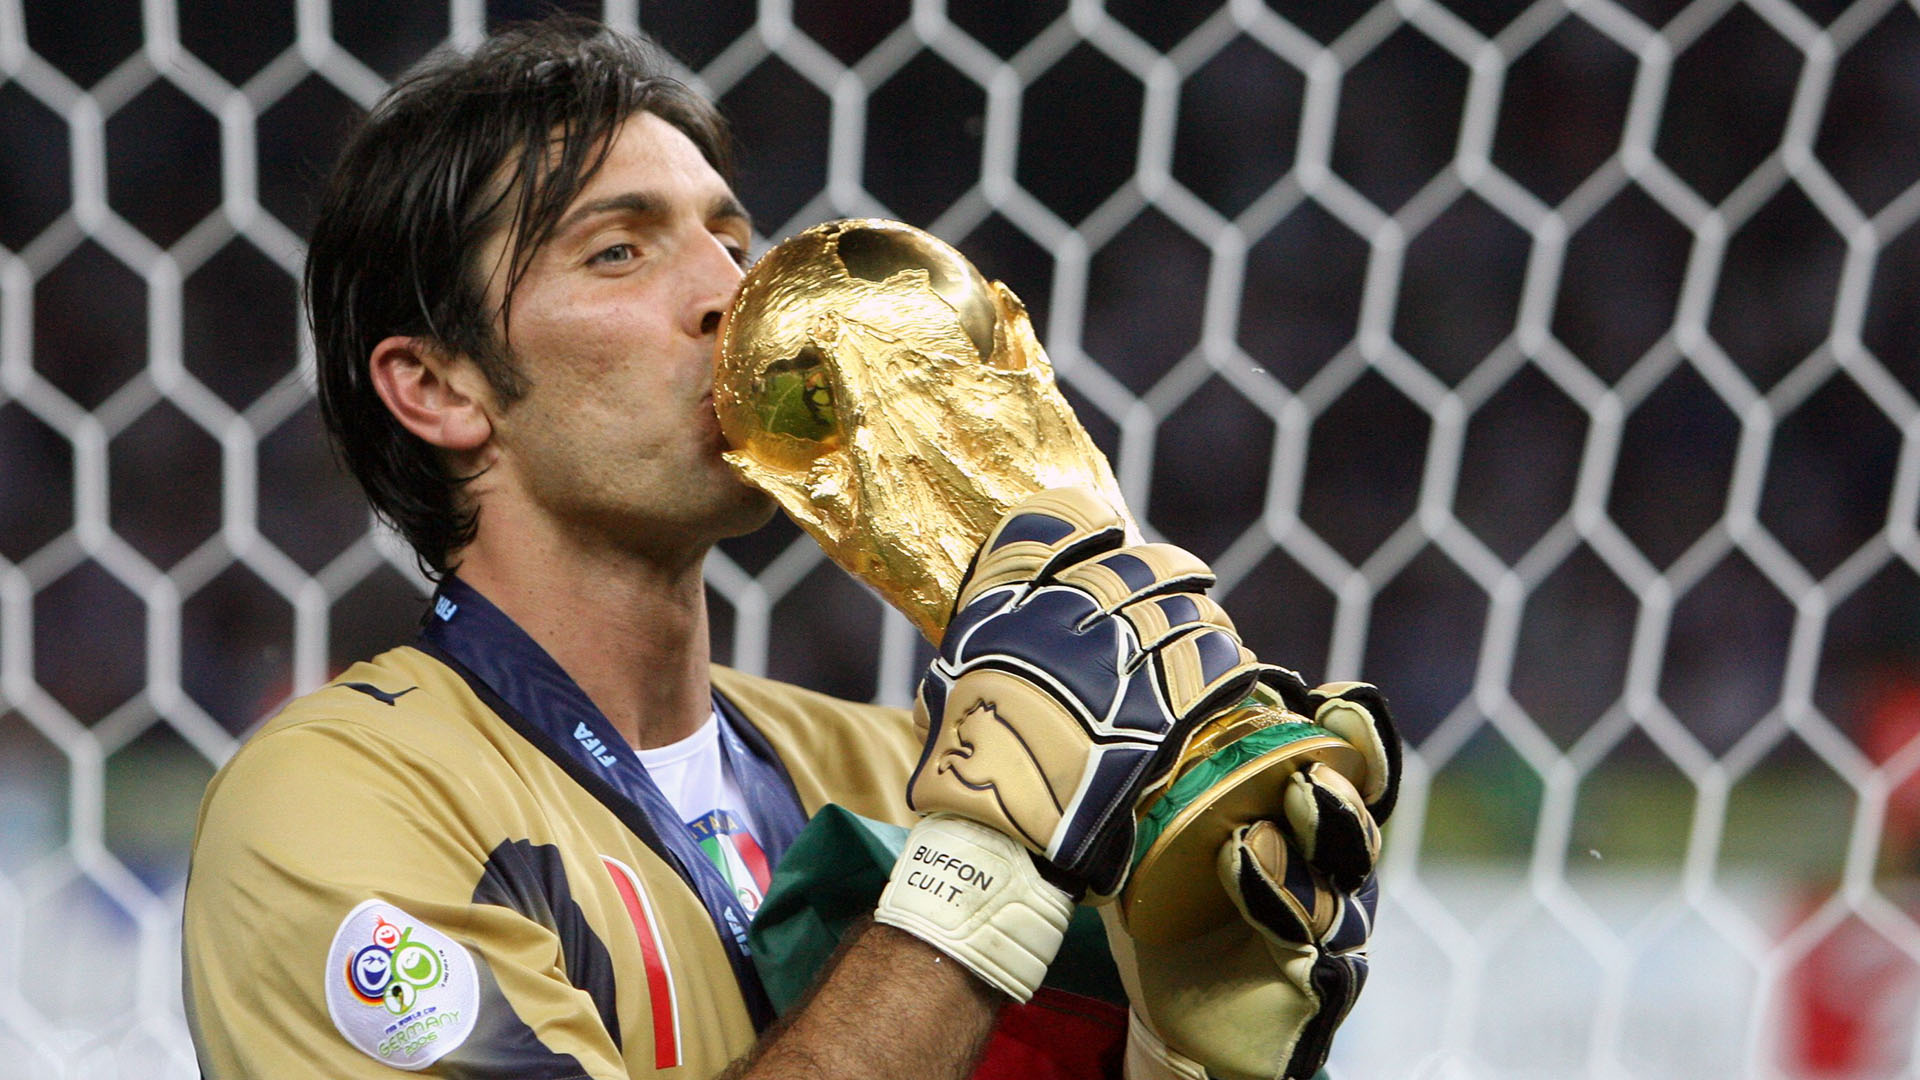 After the first rumors popped up a while back, Gianluigi Buffon appears to have made up his mind. He’s set to announce his retirement in the coming days.